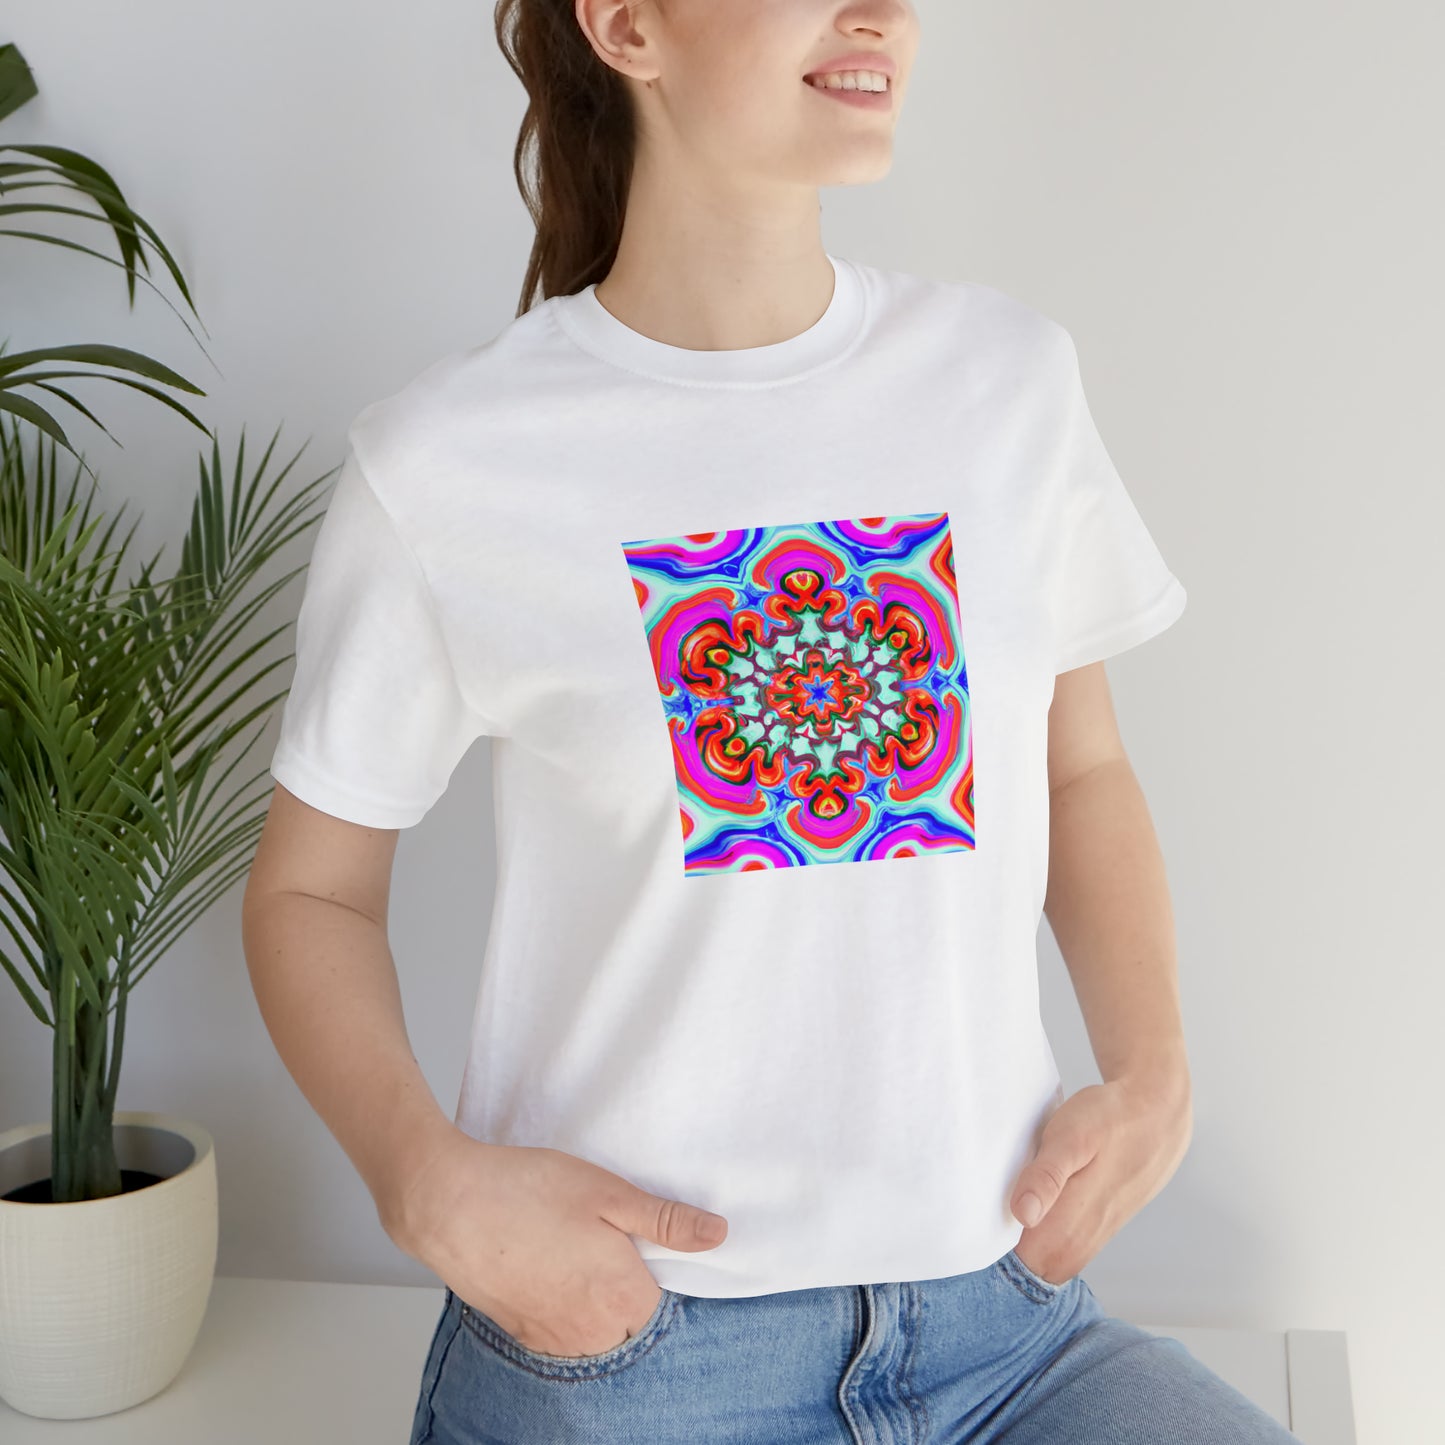 Winston Waugh - Psychedelic Trippy Pattern Tee Shirt